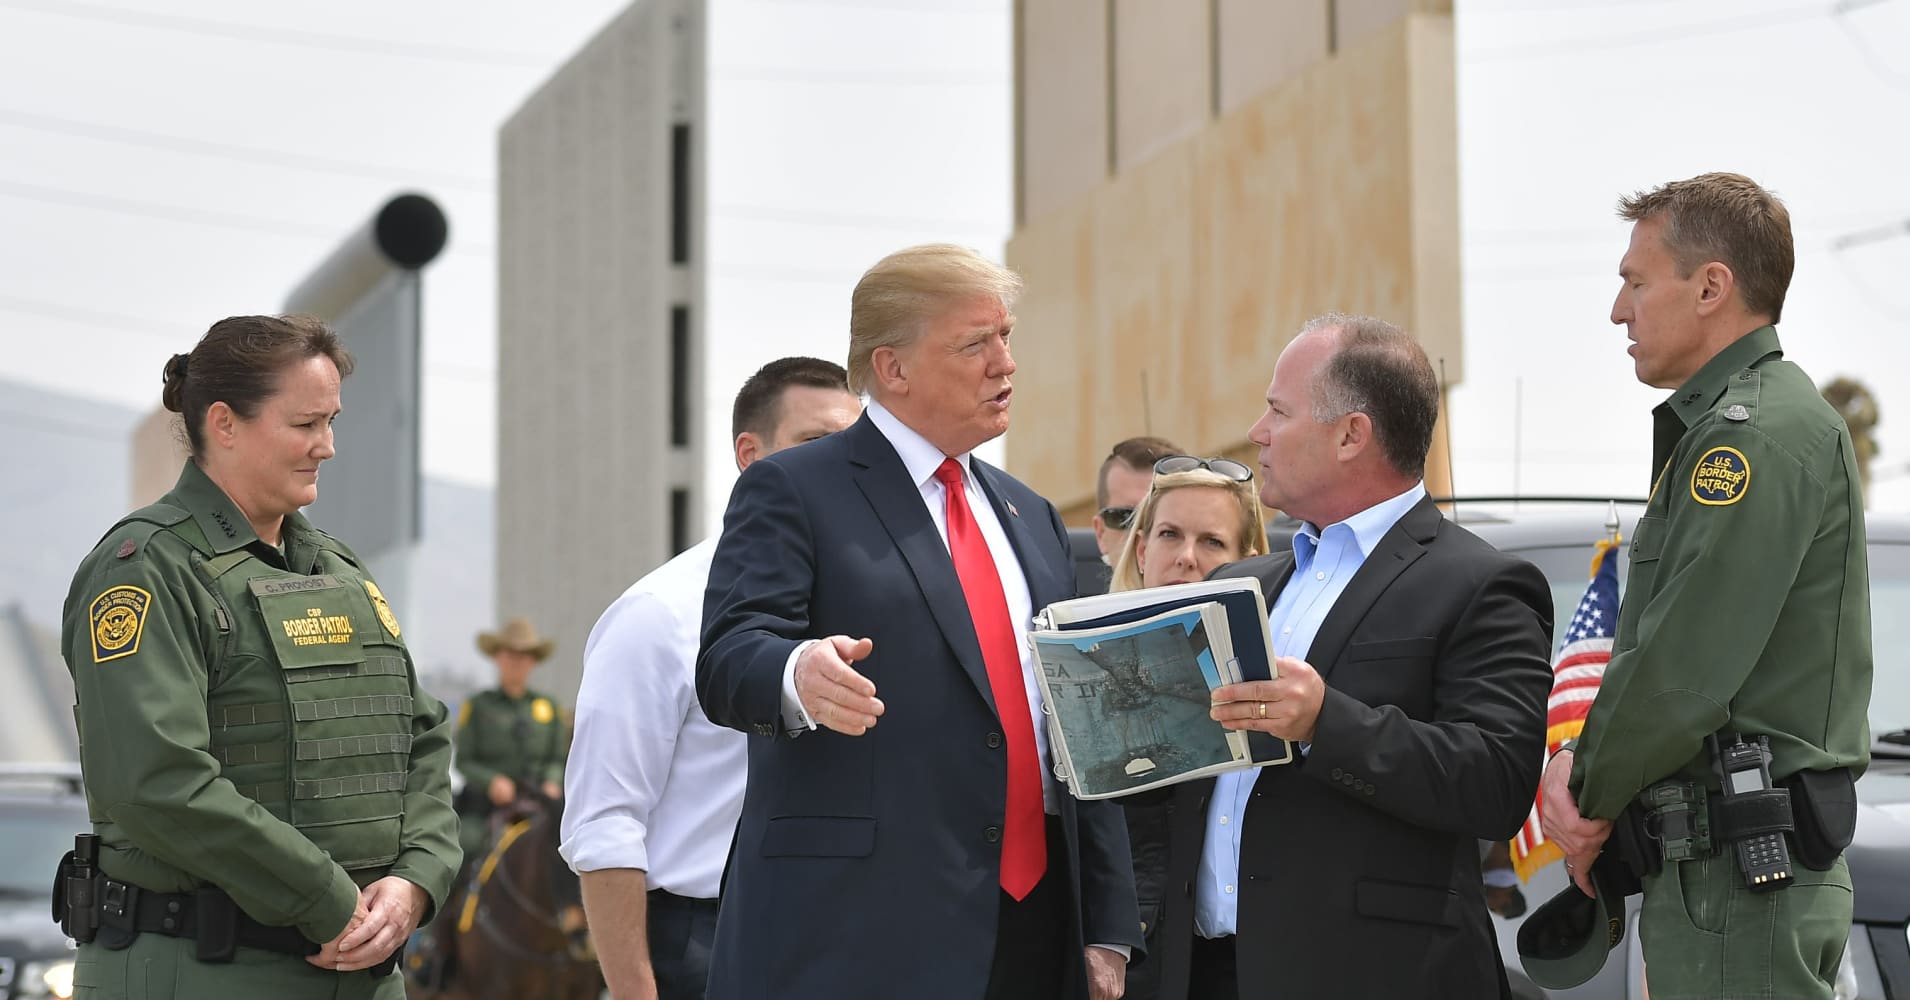 How long will it take to build the border wall? Years longer than Trump claims, experts say